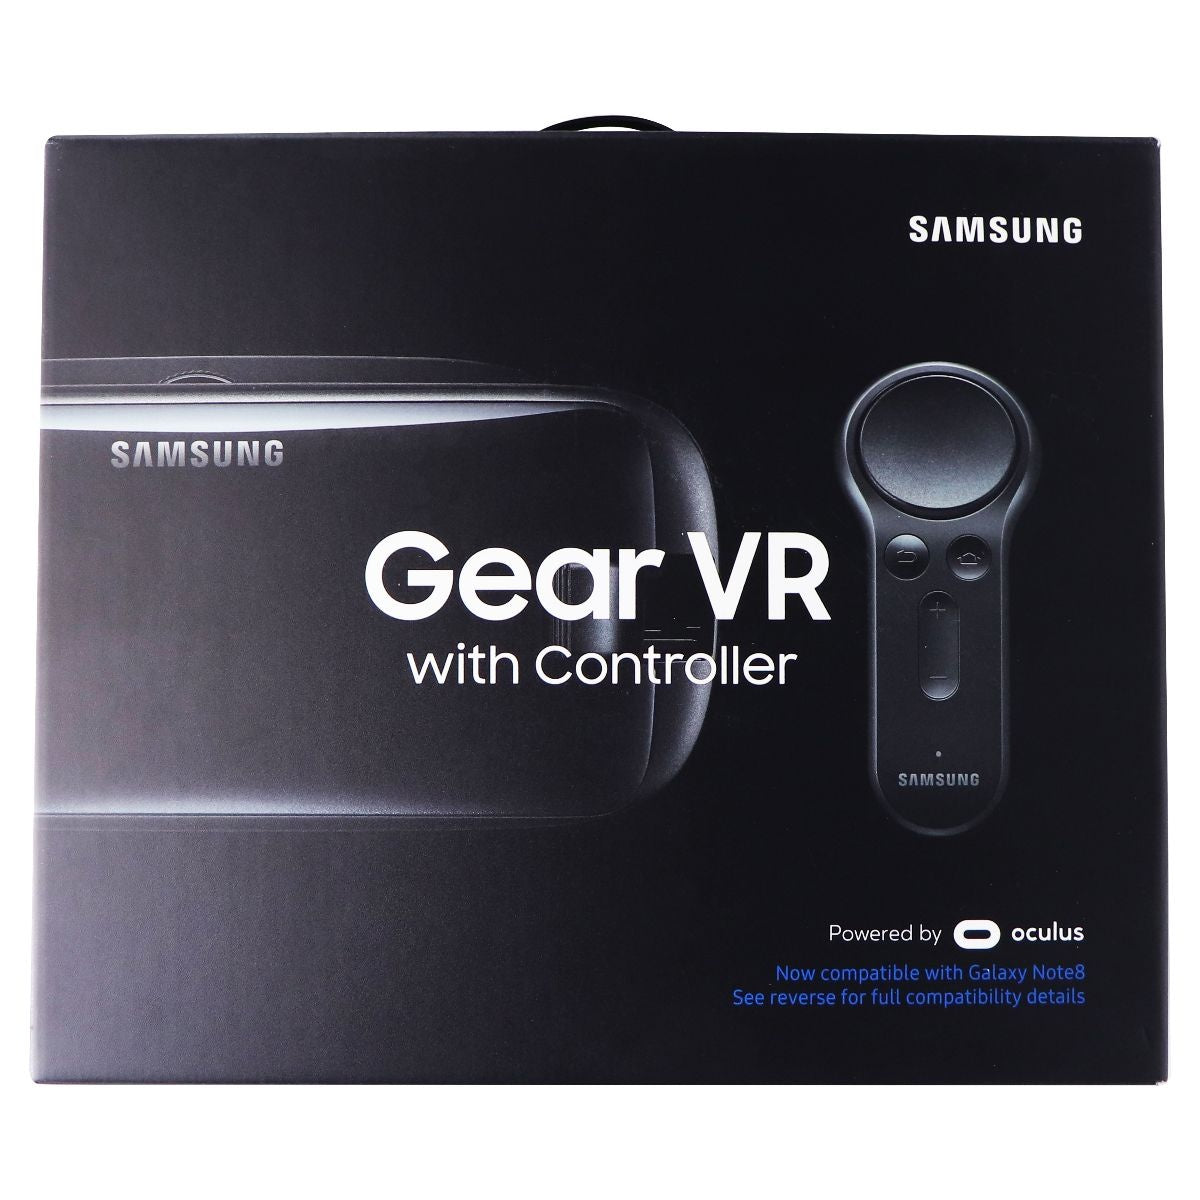 Samsung Gear VR with Controller 2017 Model - Black (SM-R325) Virtual Reality - Smartphone VR Headsets Samsung    - Simple Cell Bulk Wholesale Pricing - USA Seller